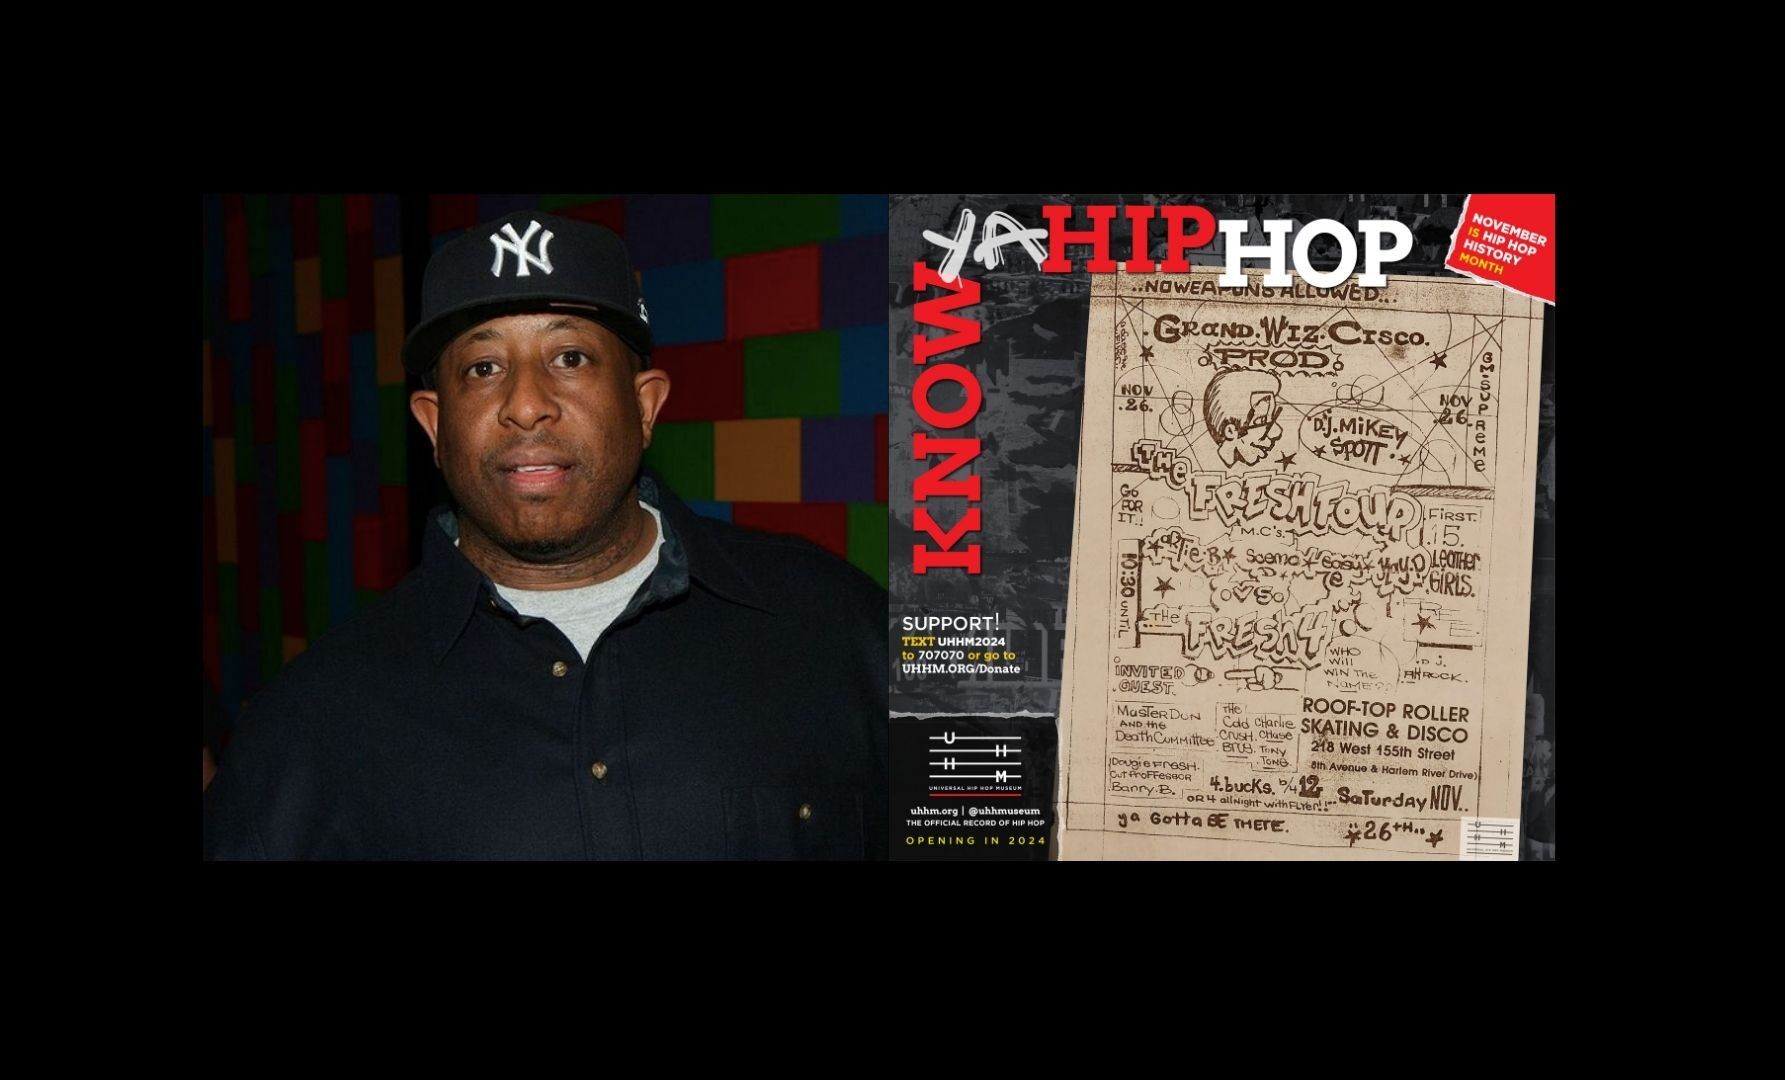 KNOW YA HIP HOP: DJ Premier And The Fresh Four MCs At The Roof-Top Roller Skating & Disco In Harlem